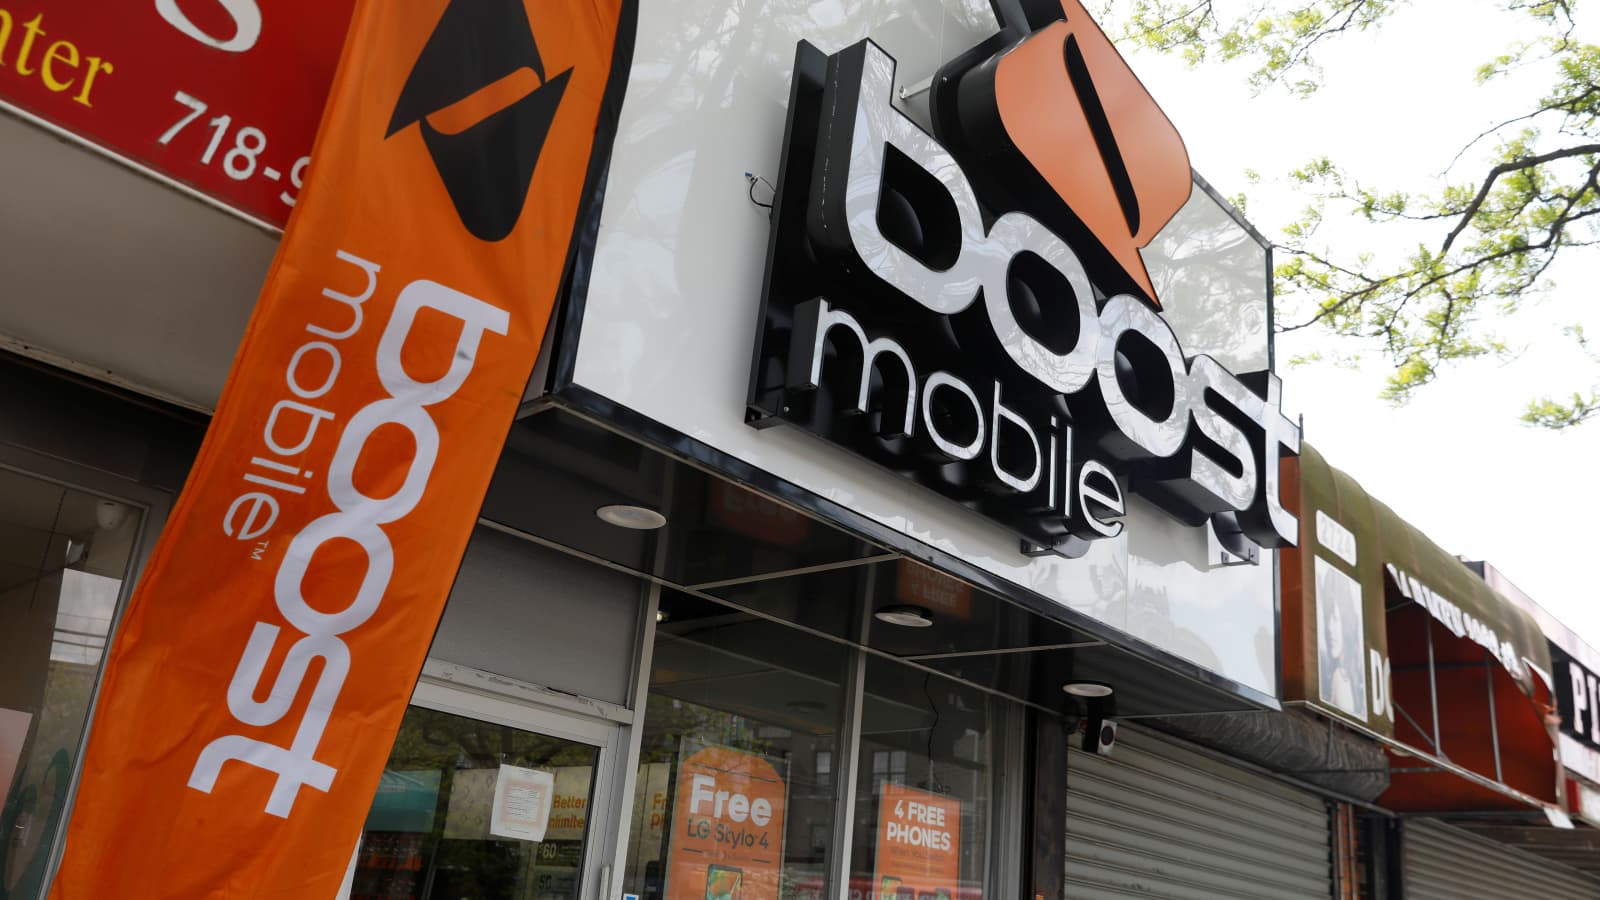 Boost Mobile founder would buy back if